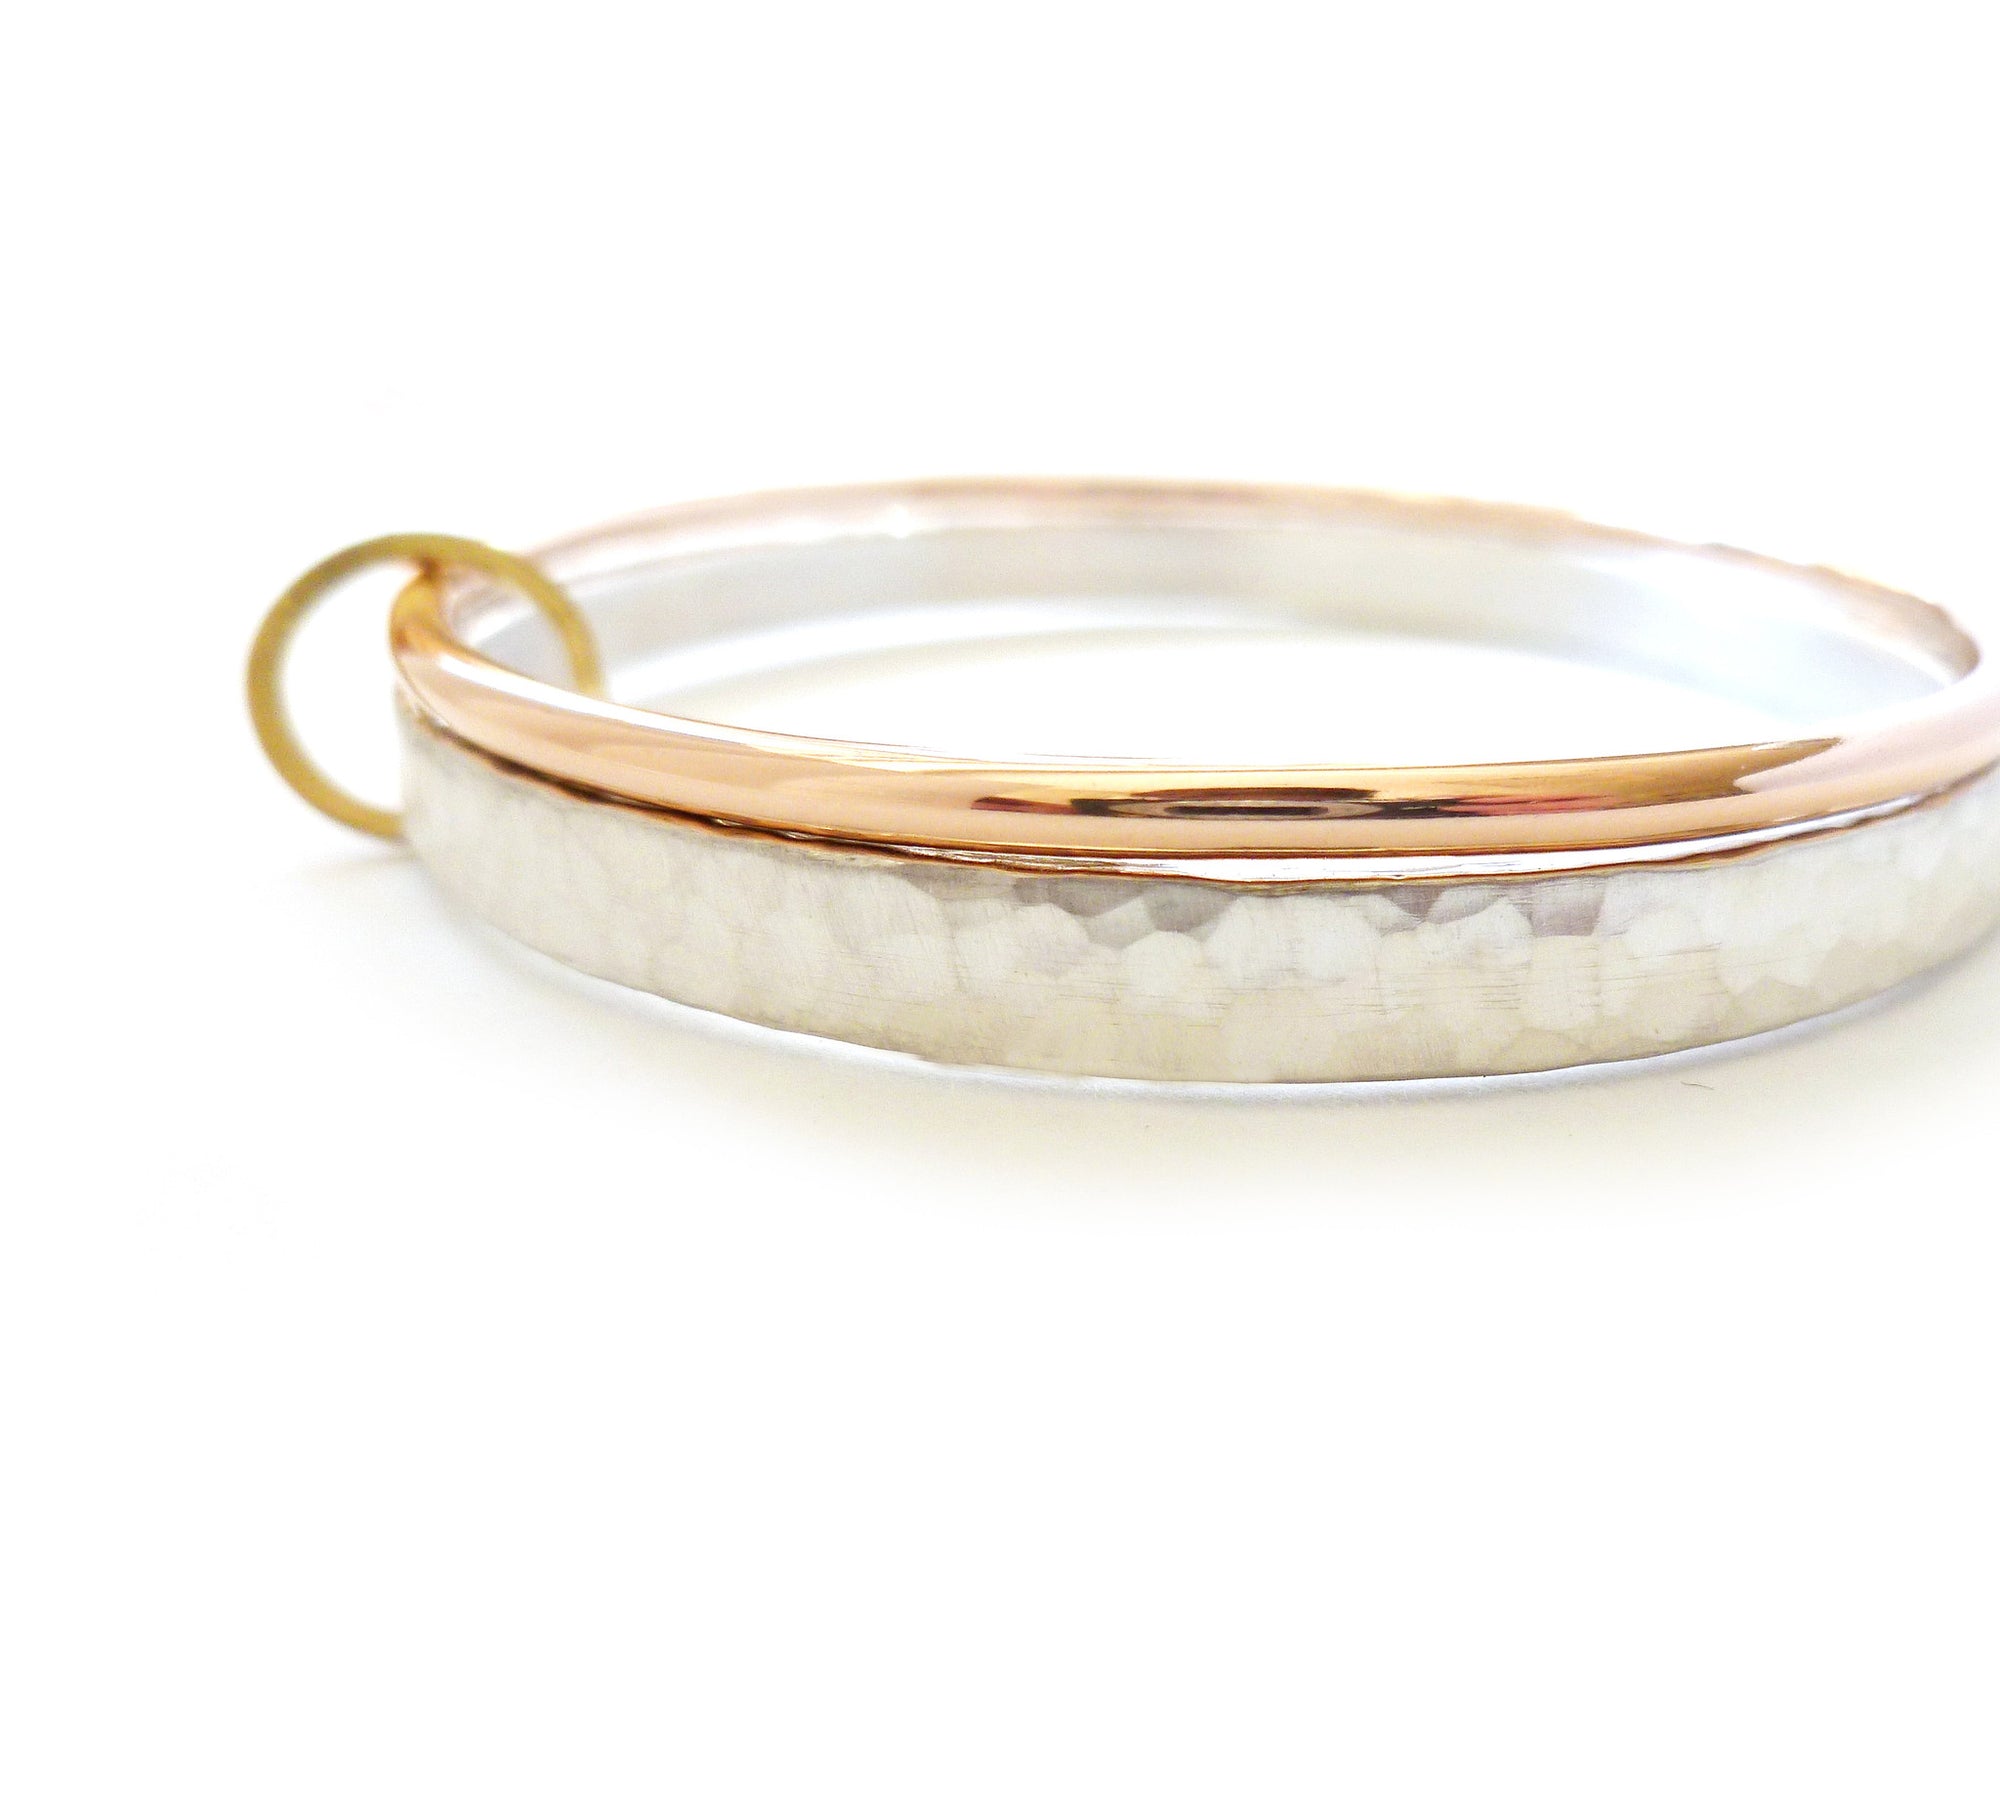 Unusual, unique, bespoke and modern three colour gold and silver bangle with brushed finish. Handmade by Sue Lane Contempoary Jewellery in Herefordshire, UK